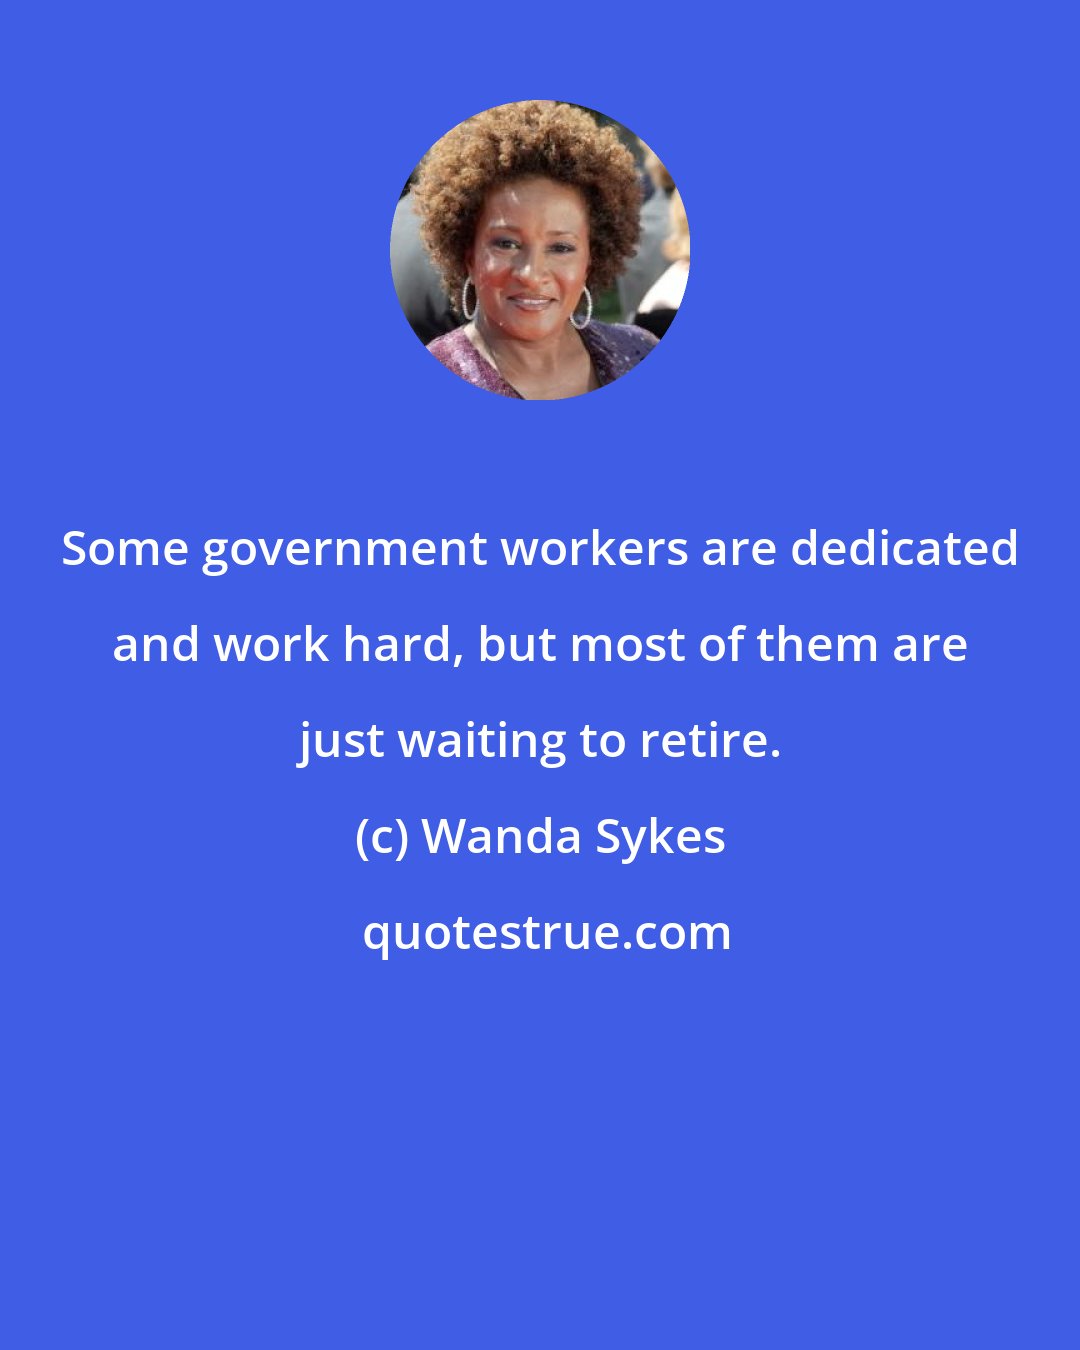 Wanda Sykes: Some government workers are dedicated and work hard, but most of them are just waiting to retire.